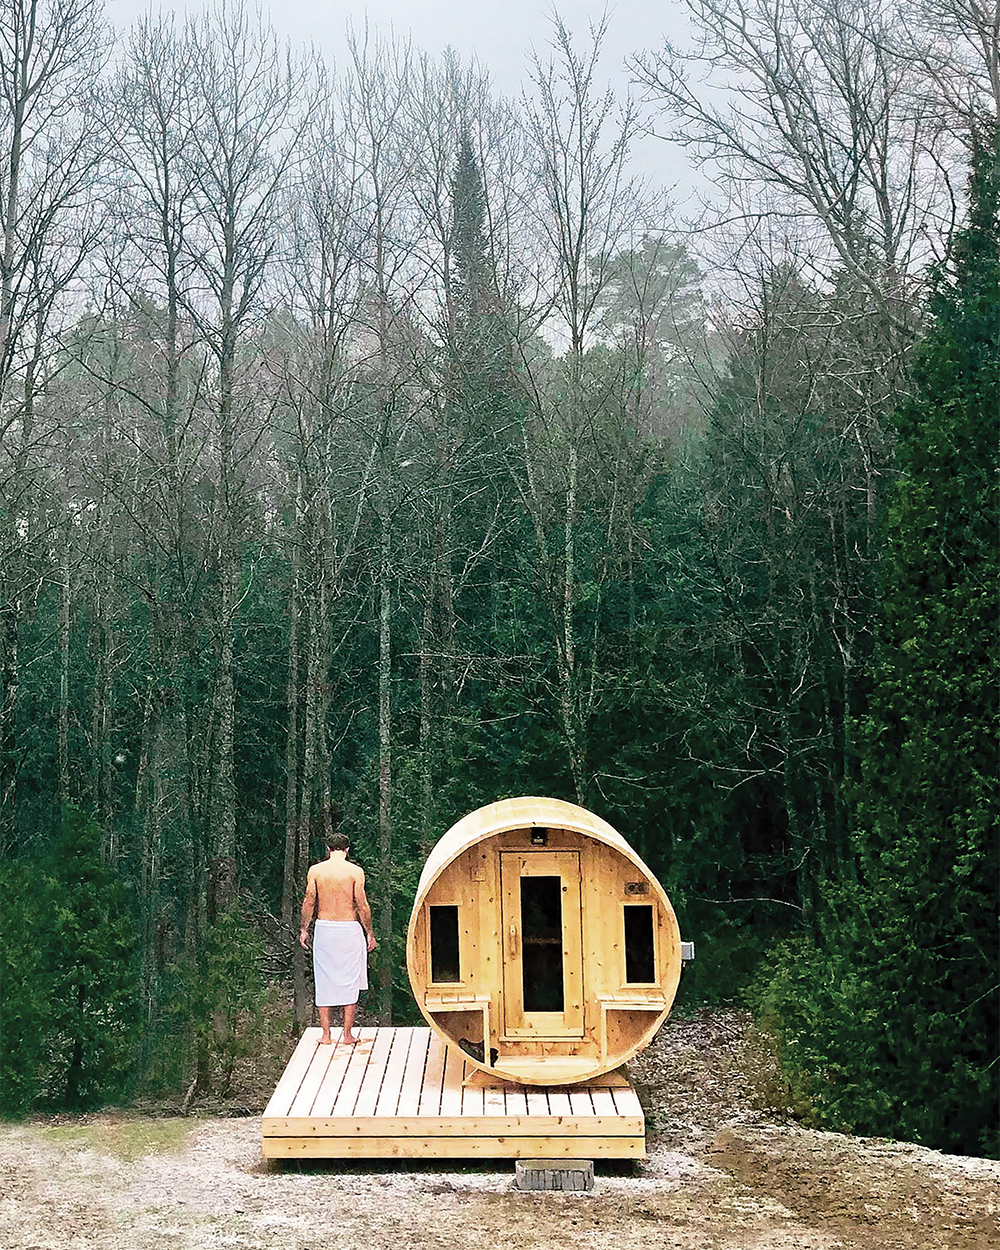 The Luna Log House (@lunaloghouse), nestled on over 10 acres of protected woodlands, offers not only the health benefits, but a bit of forest bathing as well.